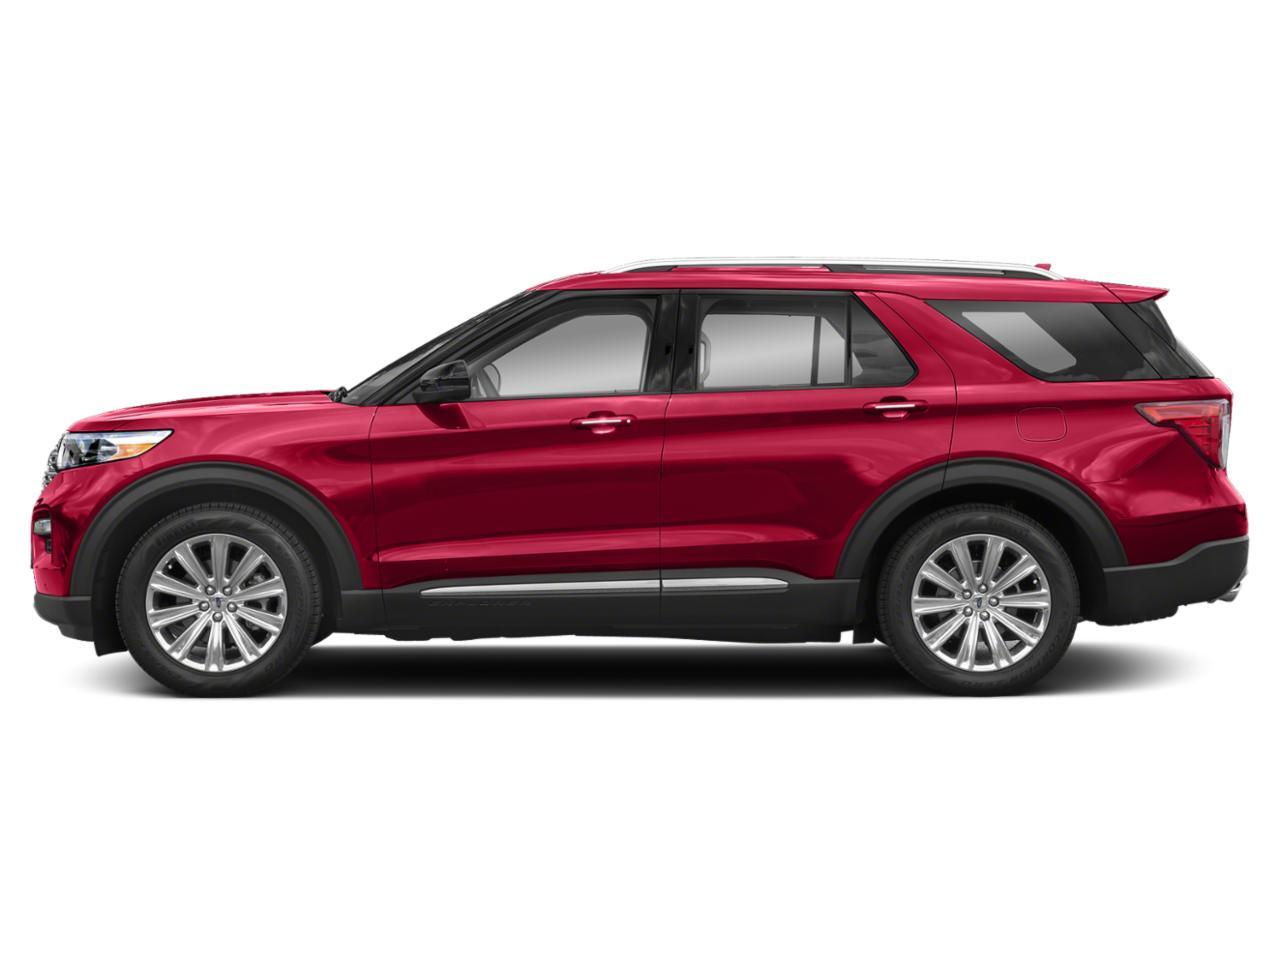 2020 Ford Explorer Limited- 4WD| REAR CAM| LANE ASSIST| BLUETOOTH| 